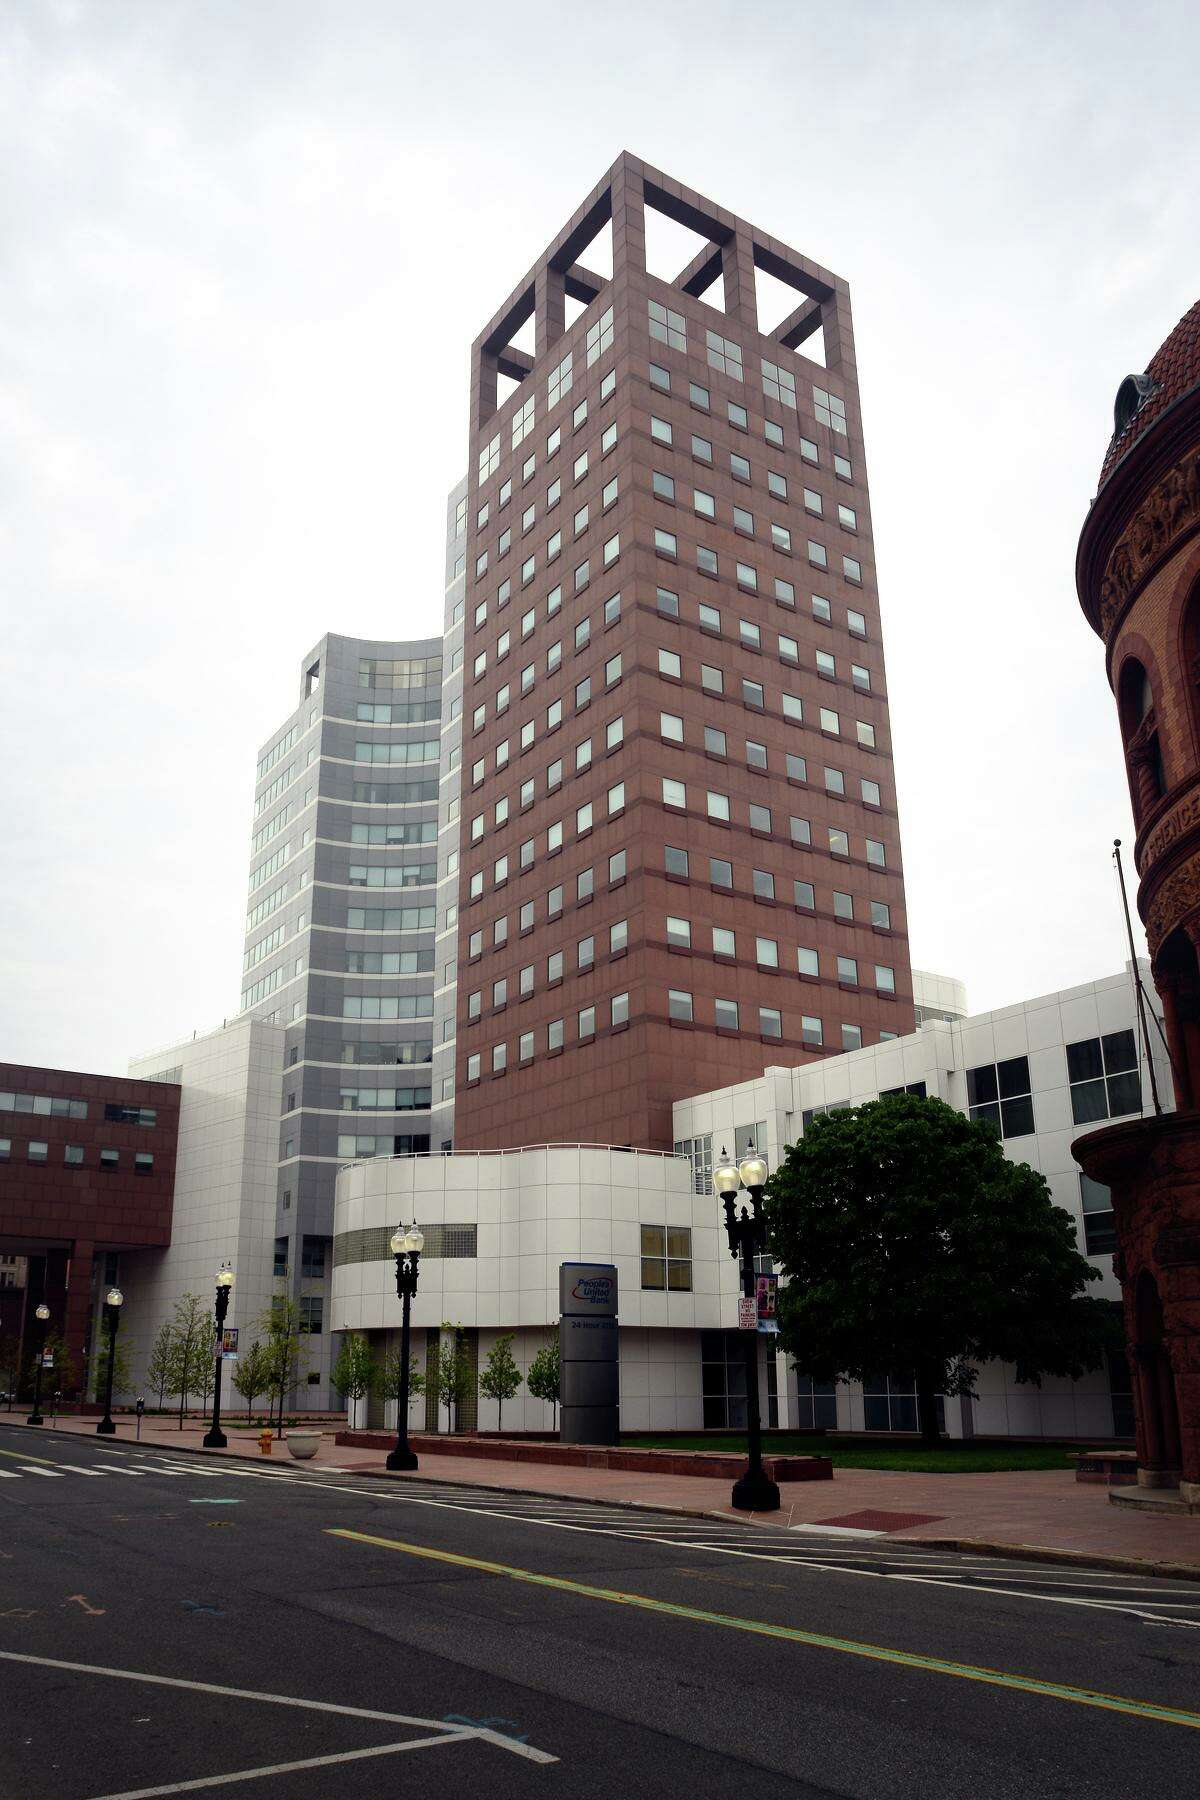 The former People’s United headquarters at 850 Main St., in Bridgeport, Conn., is now a regional headquarters for Buffalo, N.Y.-headquartered M&T Bank.